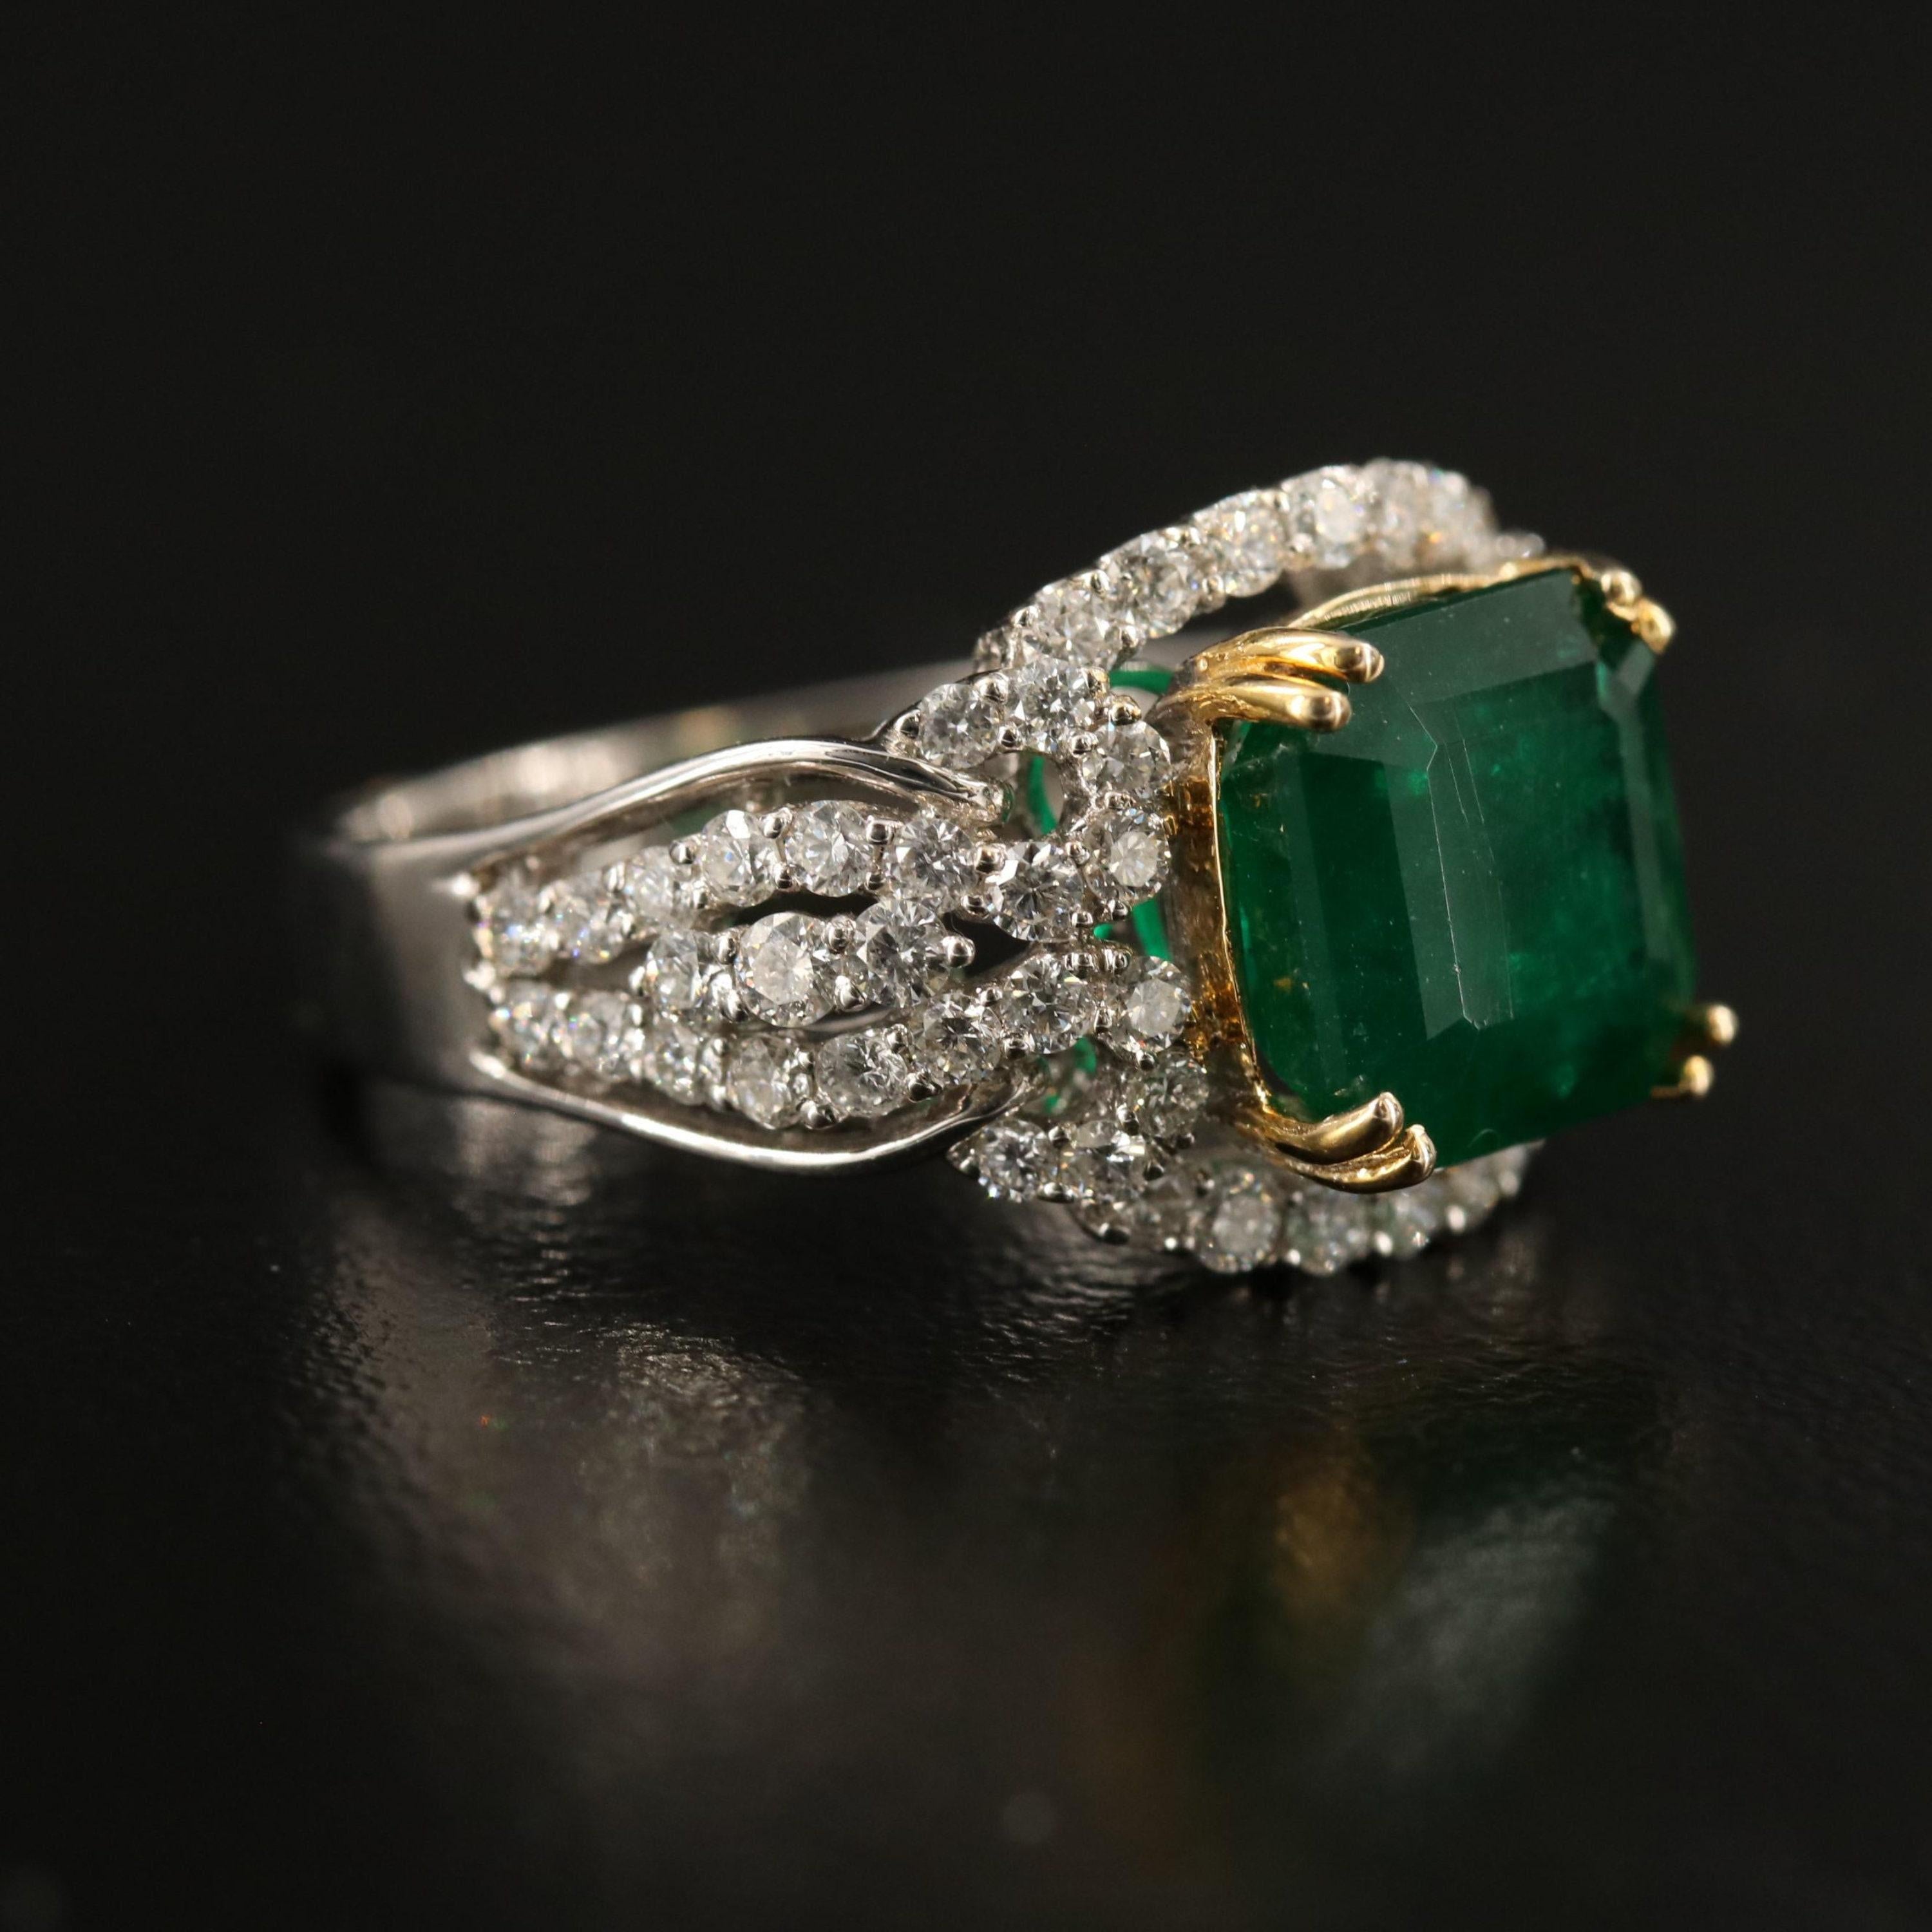 For Sale:  18K Gold 3.5 CT Natural Emerald Diamond Antique Art Deco Style Engagement Ring 3